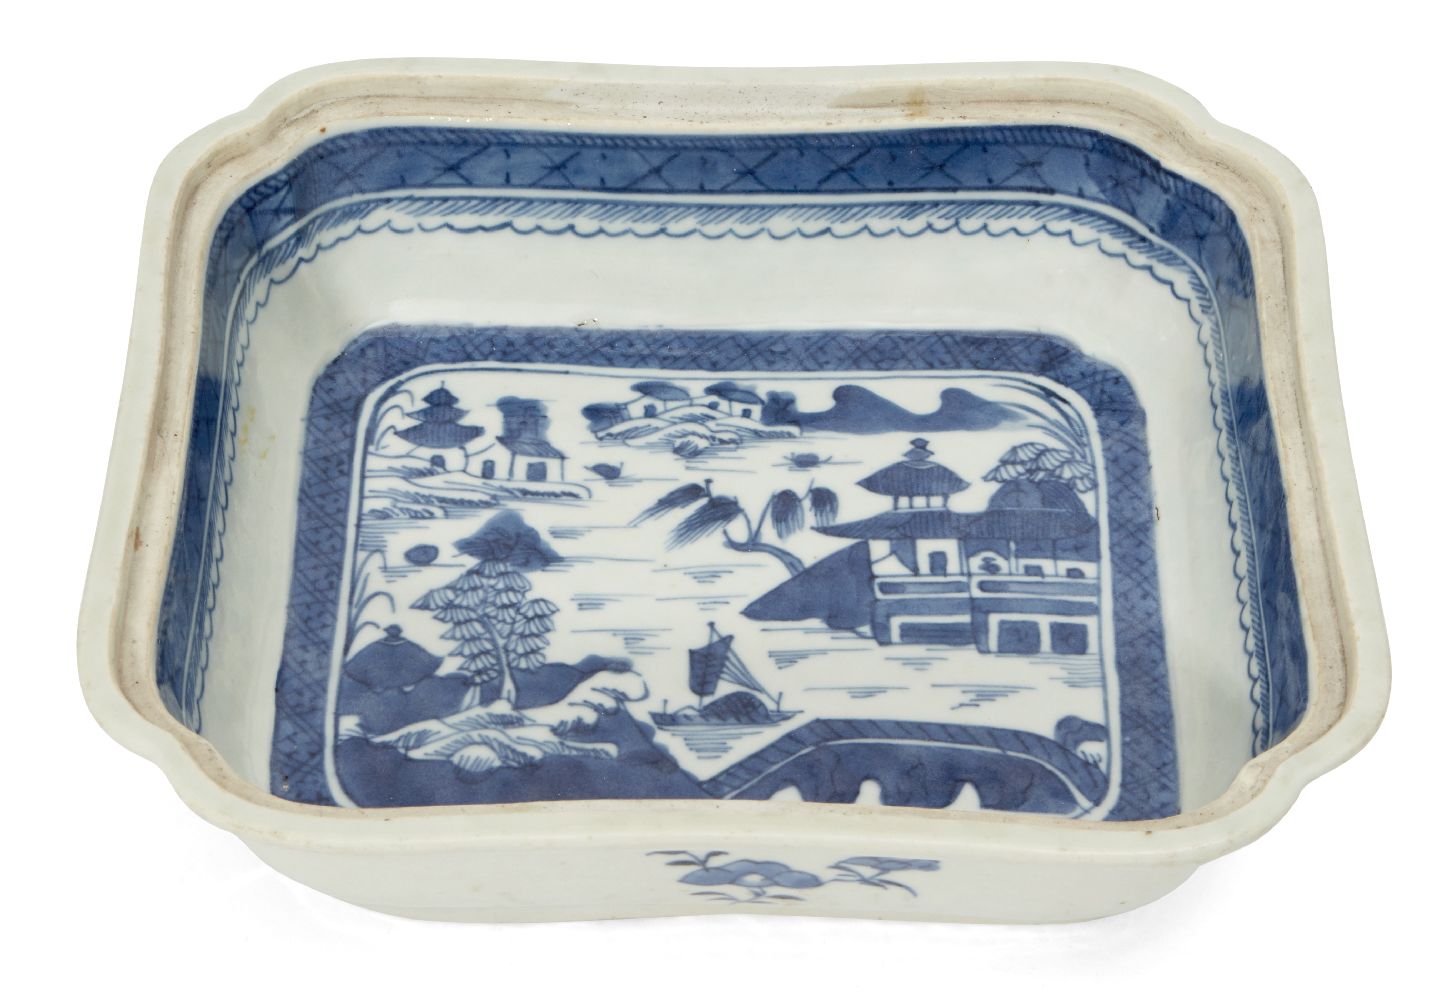 A Chinese export porcelain rectangular tureen and cover, late 19th century, painted in underglaze - Image 2 of 2